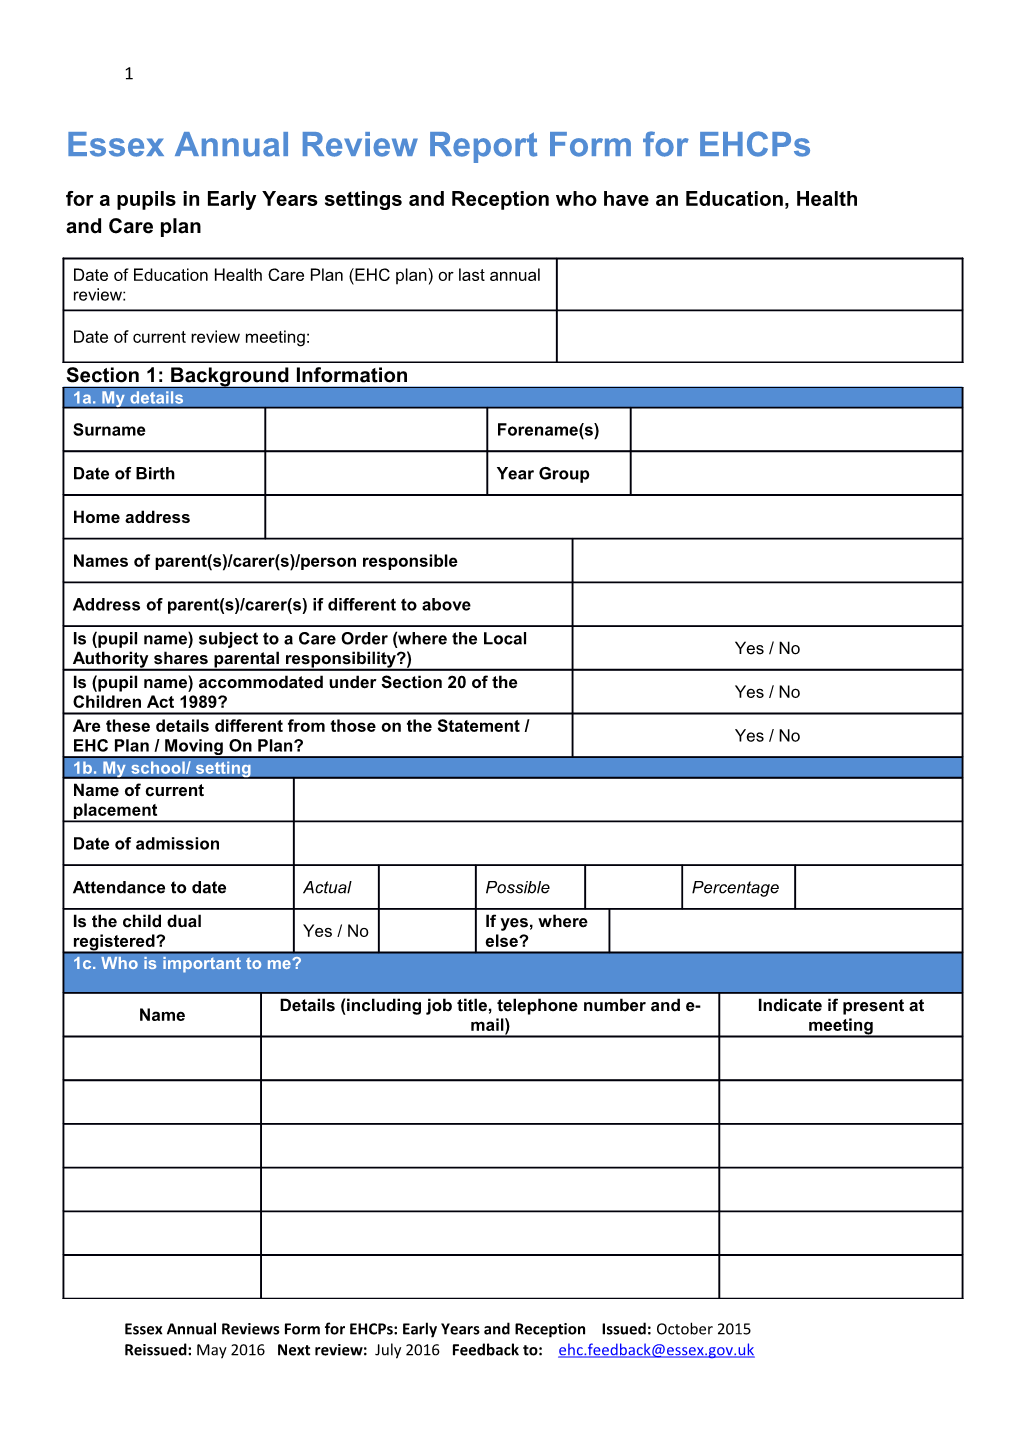 Essex Annual Review Report Form for Ehcps